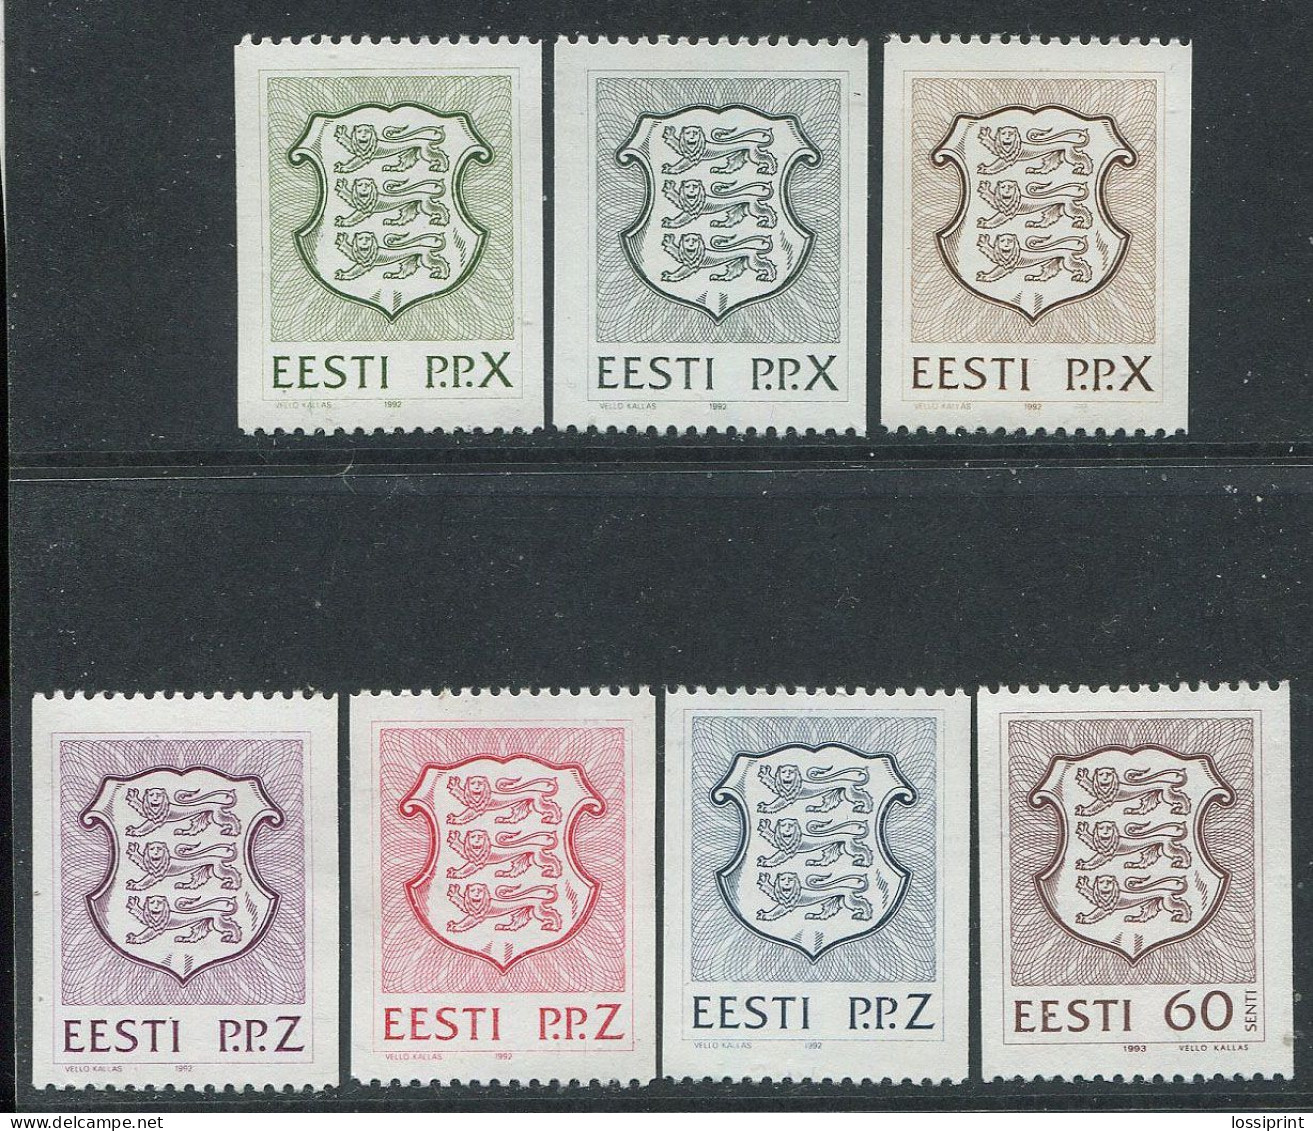 Estonia:Unused Stamps Serie Coat Of Arms, P.P.X, P.P.Z And 60 Cents, 1992-1993, MNH - Timbres